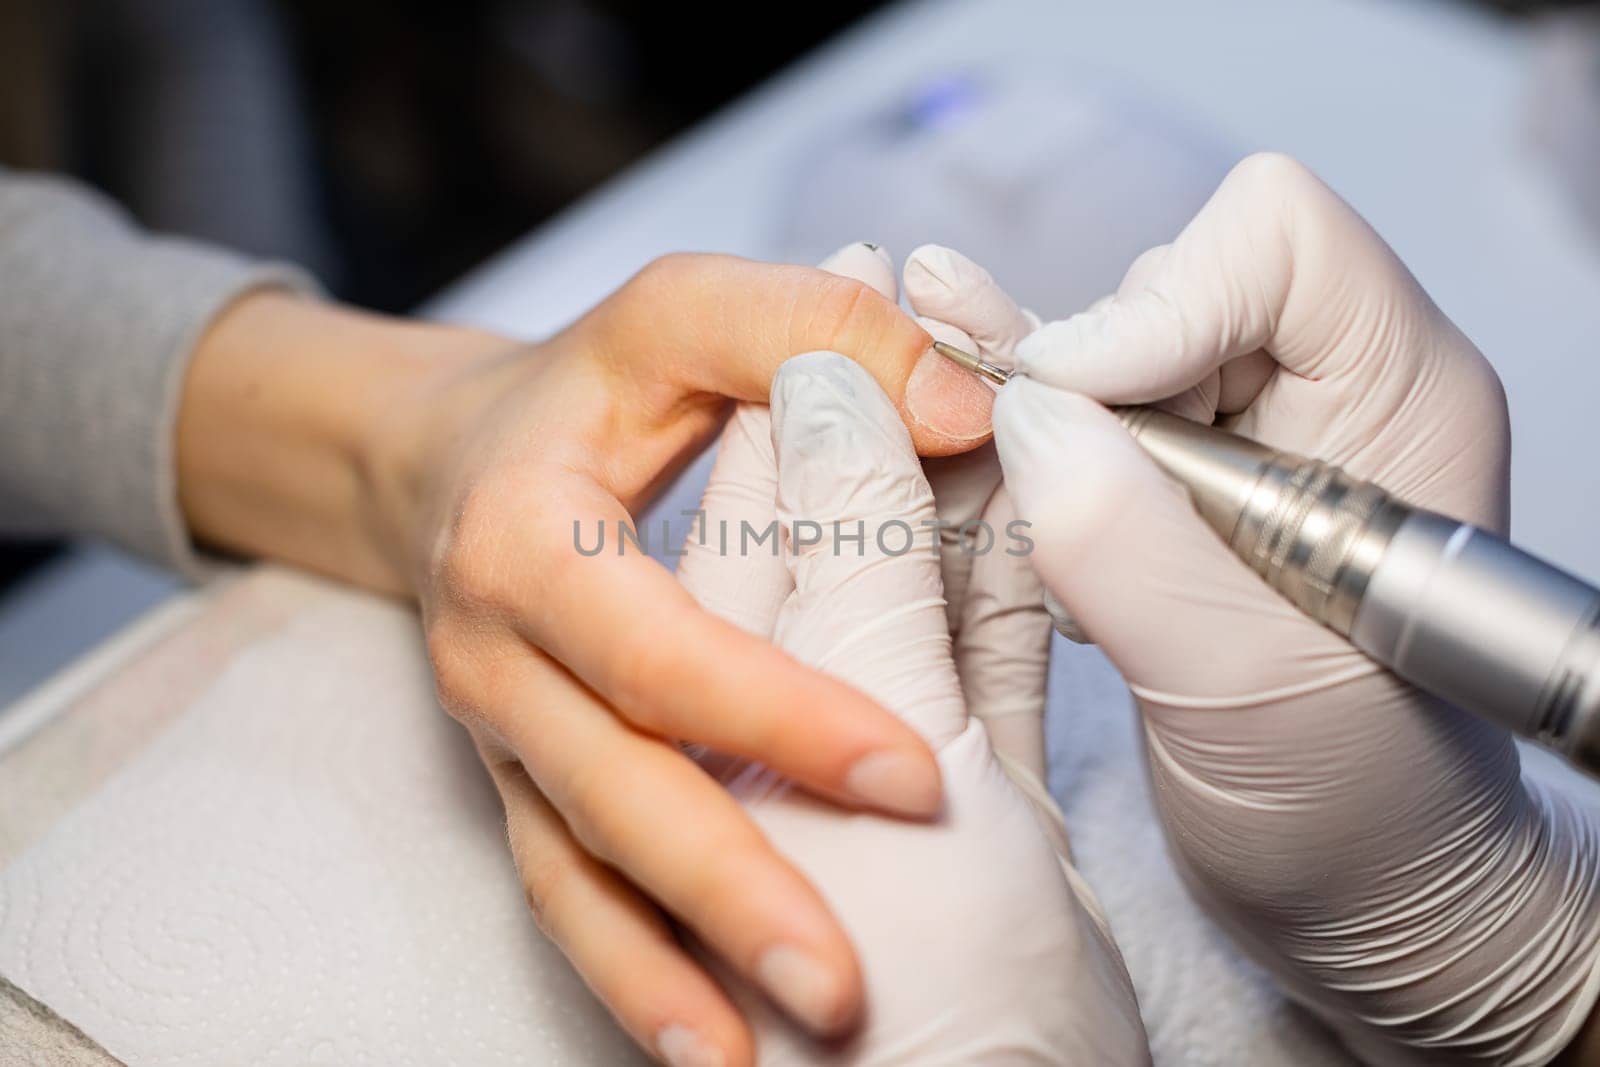 A beautician removes cuticles from a thumb nail. A beauty salon customer has a manicure done. The nail milling machine effectively prepares the nail plate. The beautician wears disposable gloves.